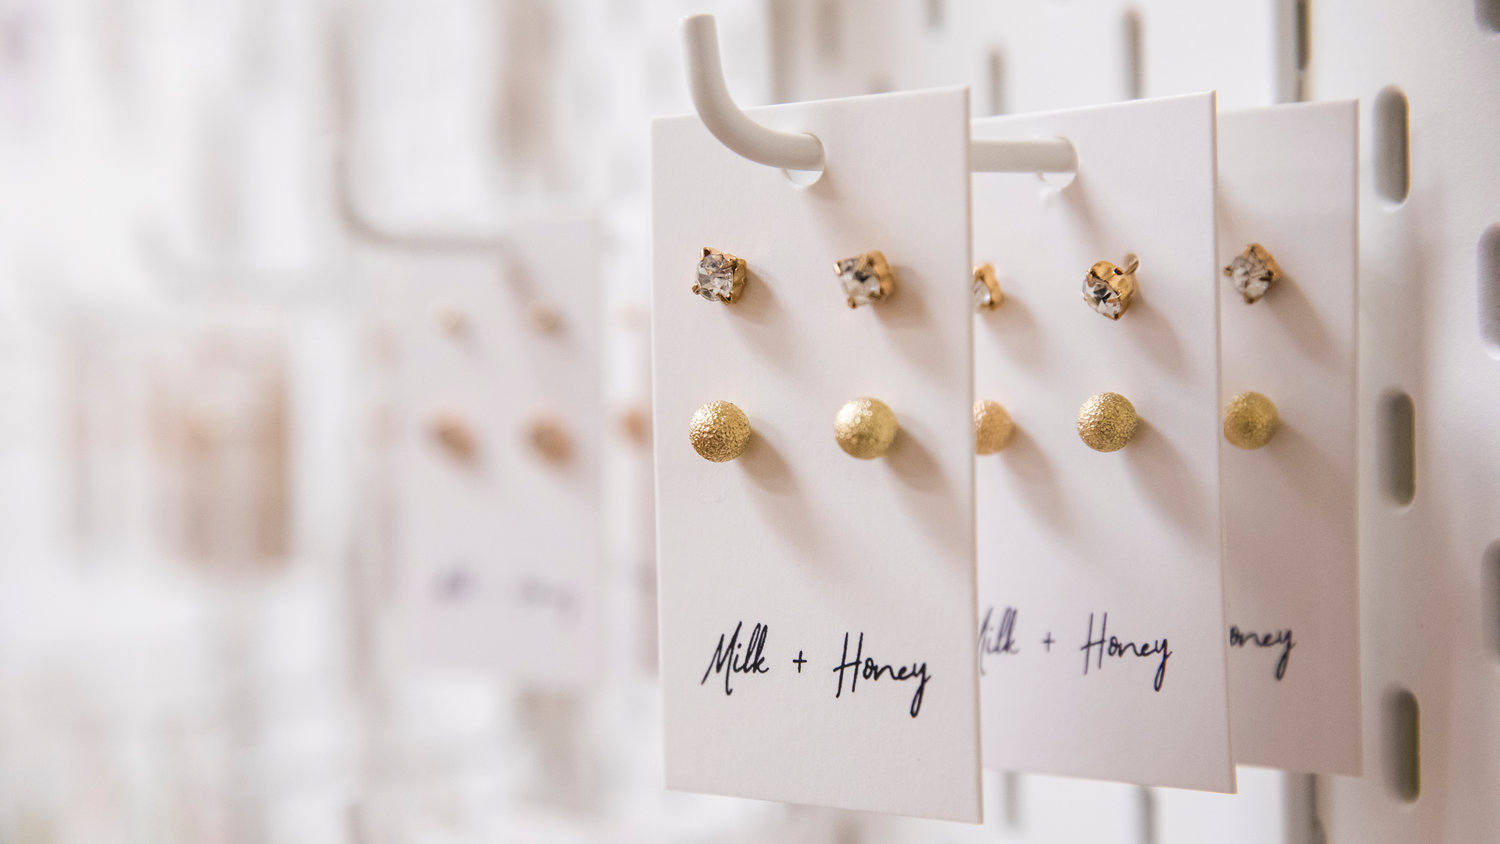 Earrings and other jewelry hang on display inside “Milk + Honey,” in Winlock.